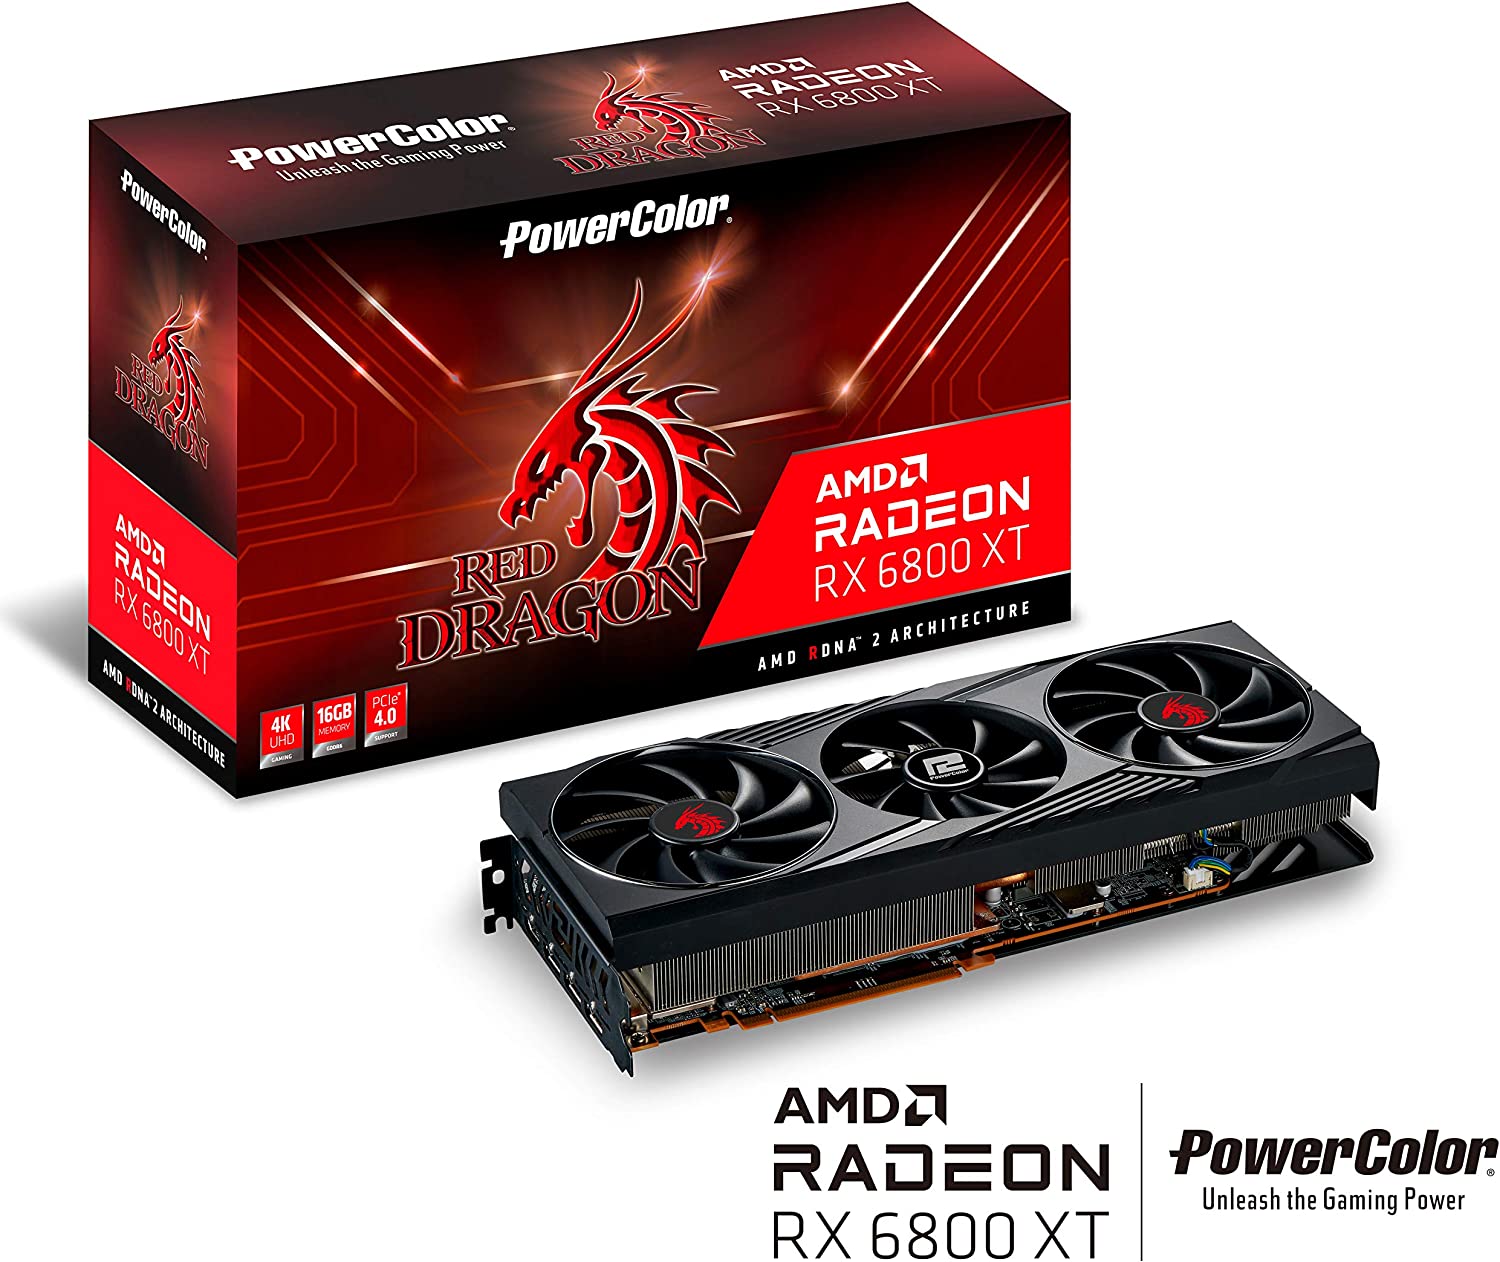 PowerColor Red Dragon AMD Radeon™ RX 6800 XT Gaming Graphics Card with 16GB GDDR6 Memory - DELIVERY DEC 7-10th $554.99 + TAX at Amazon